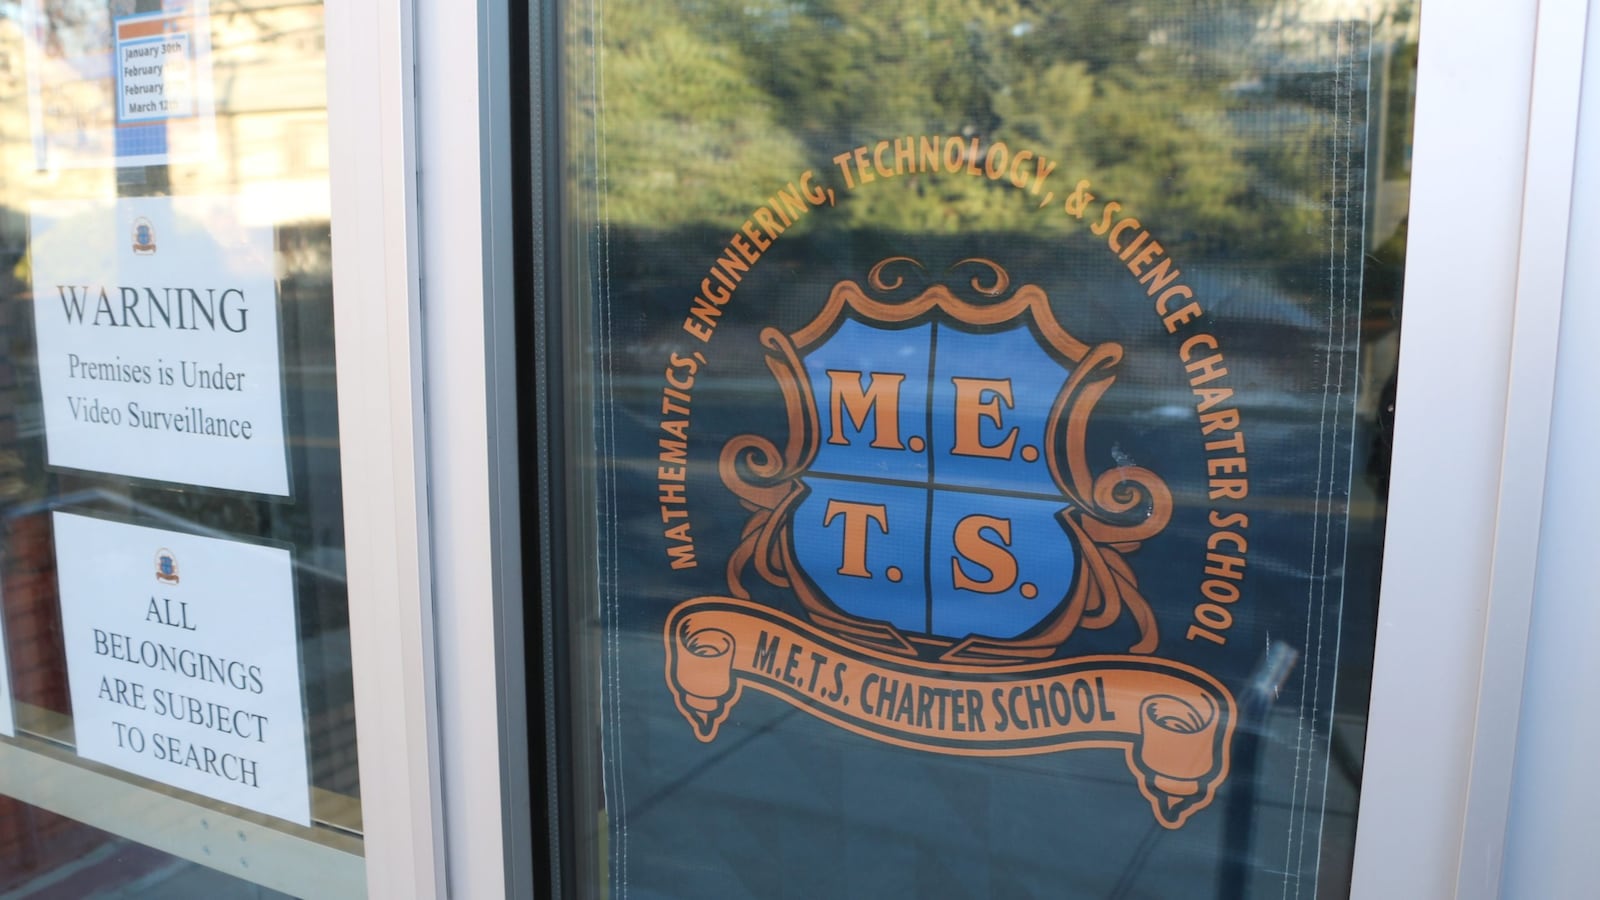 The state has ordered M.E.T.S. Charter School, which has campuses in Newark and Jersey City, to cease operations after this school year.